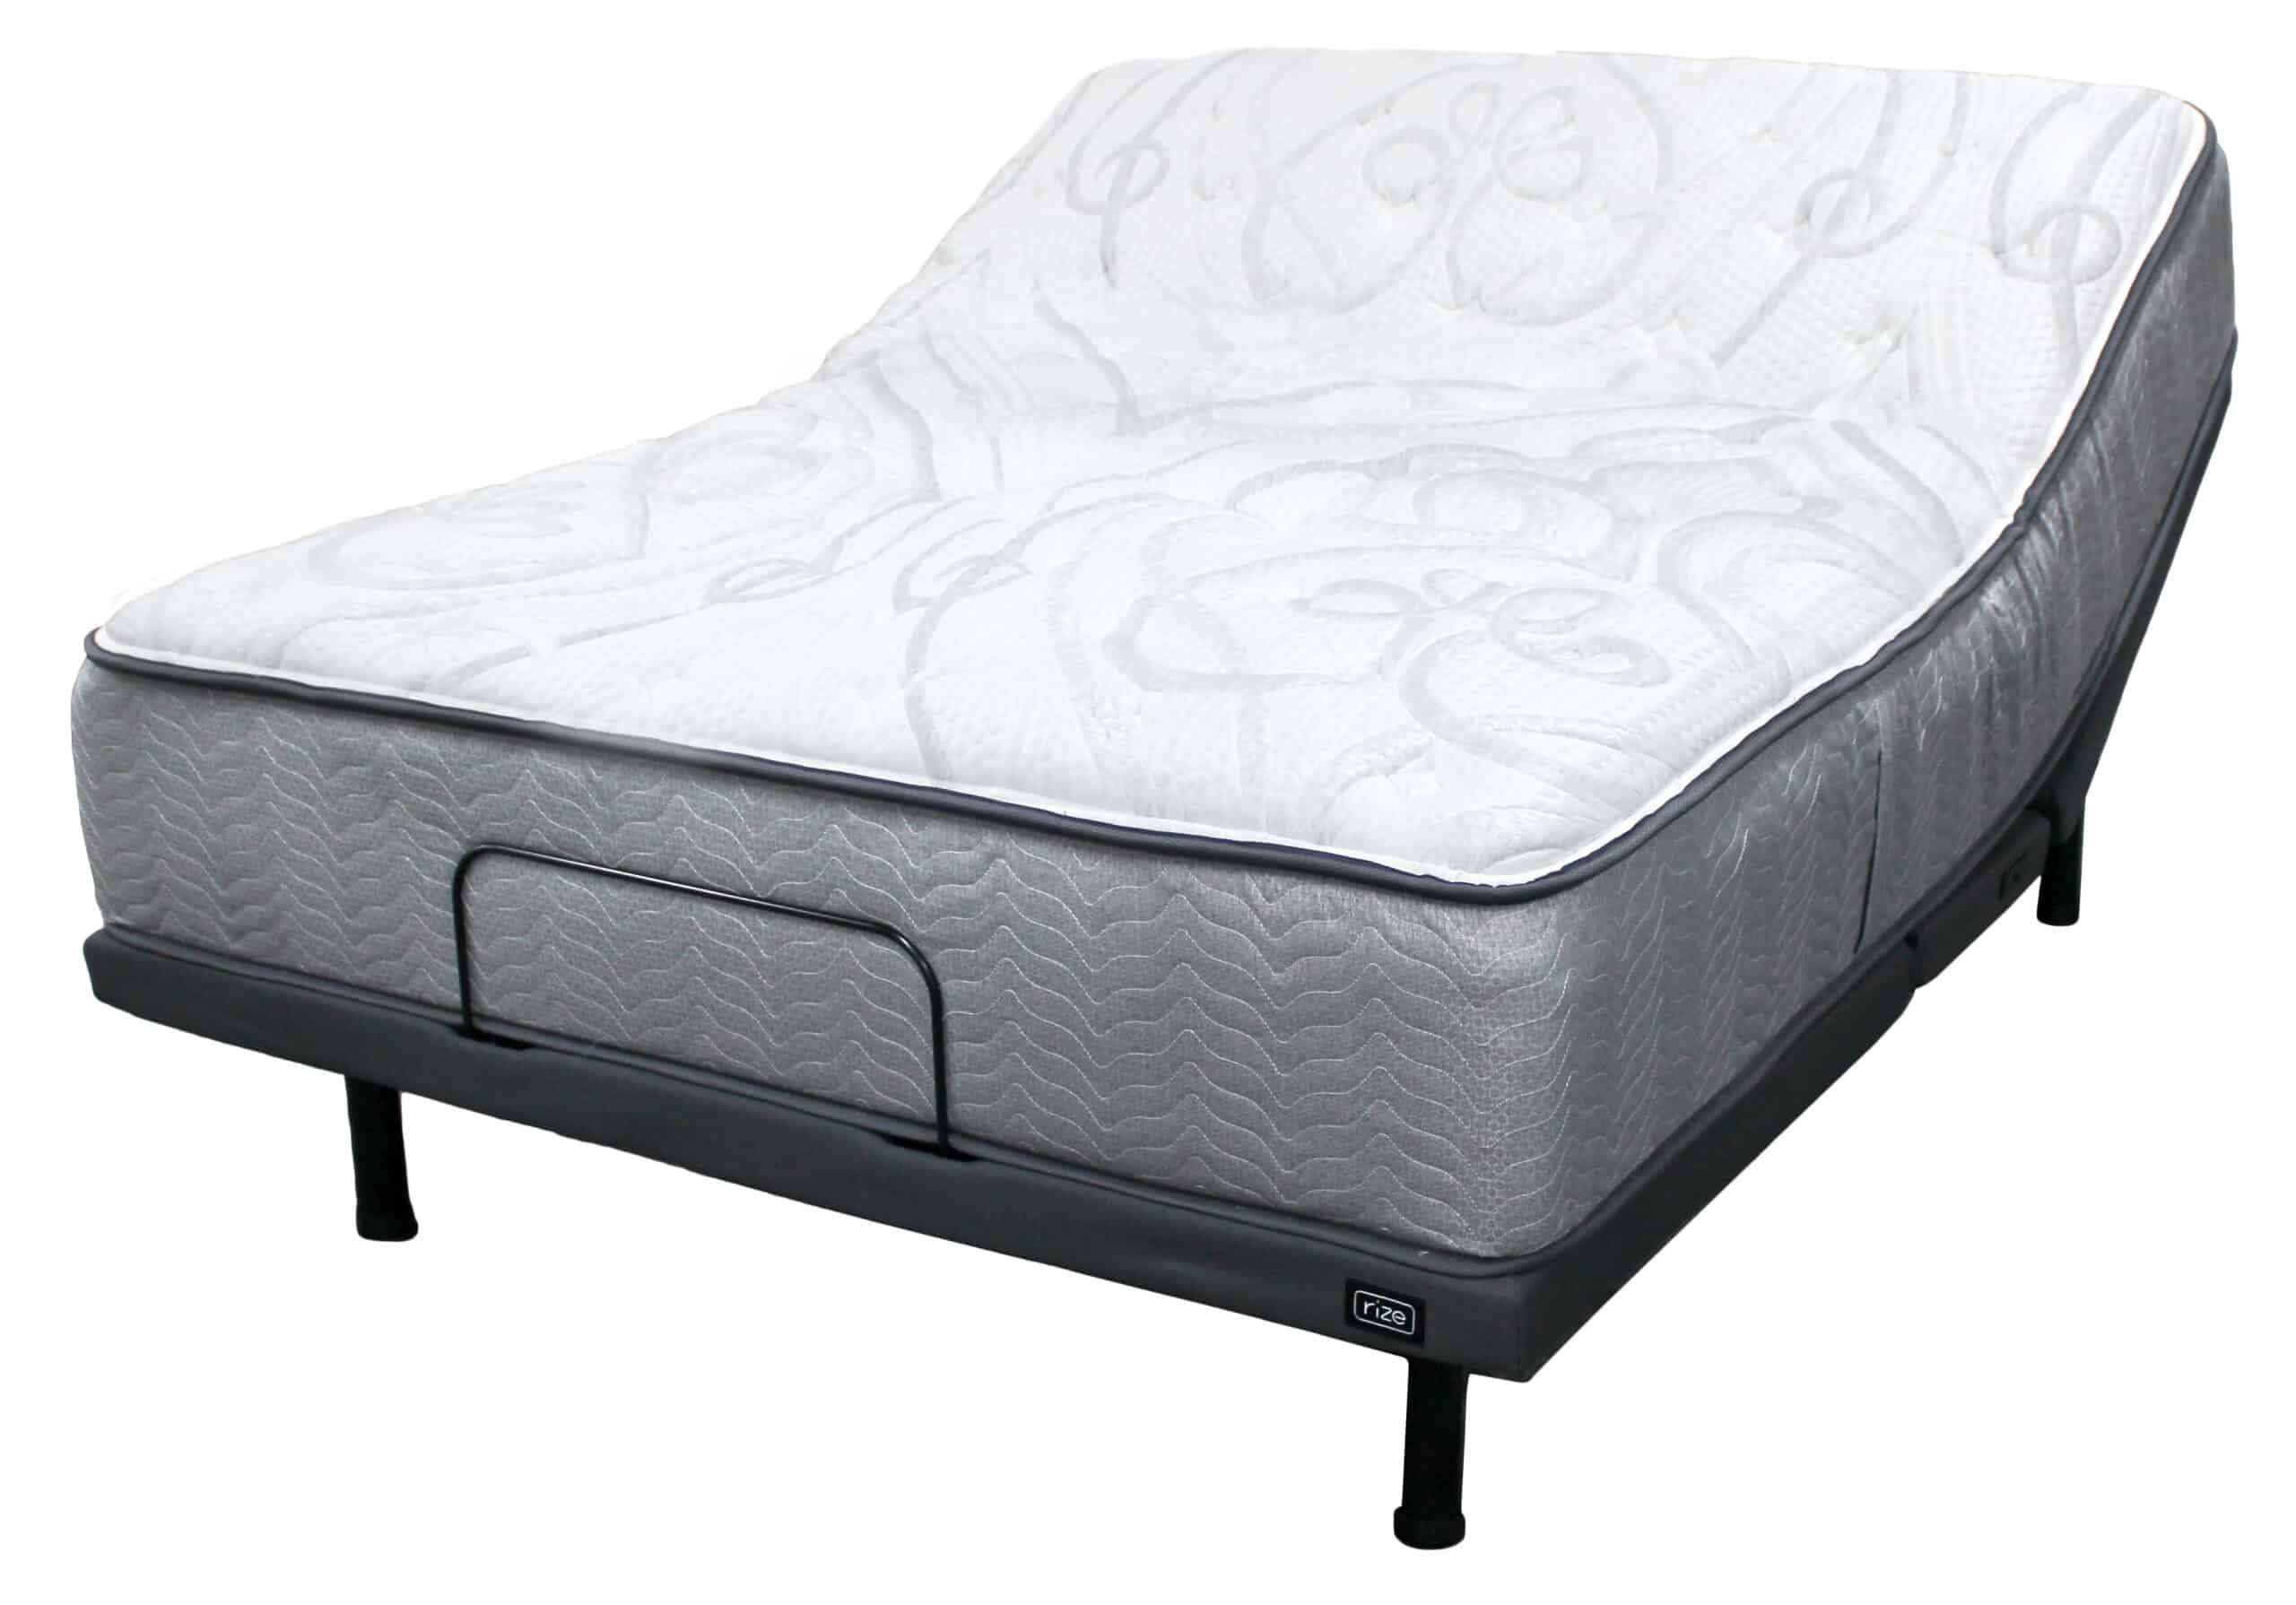 A slightly inclined Generations Mattress.